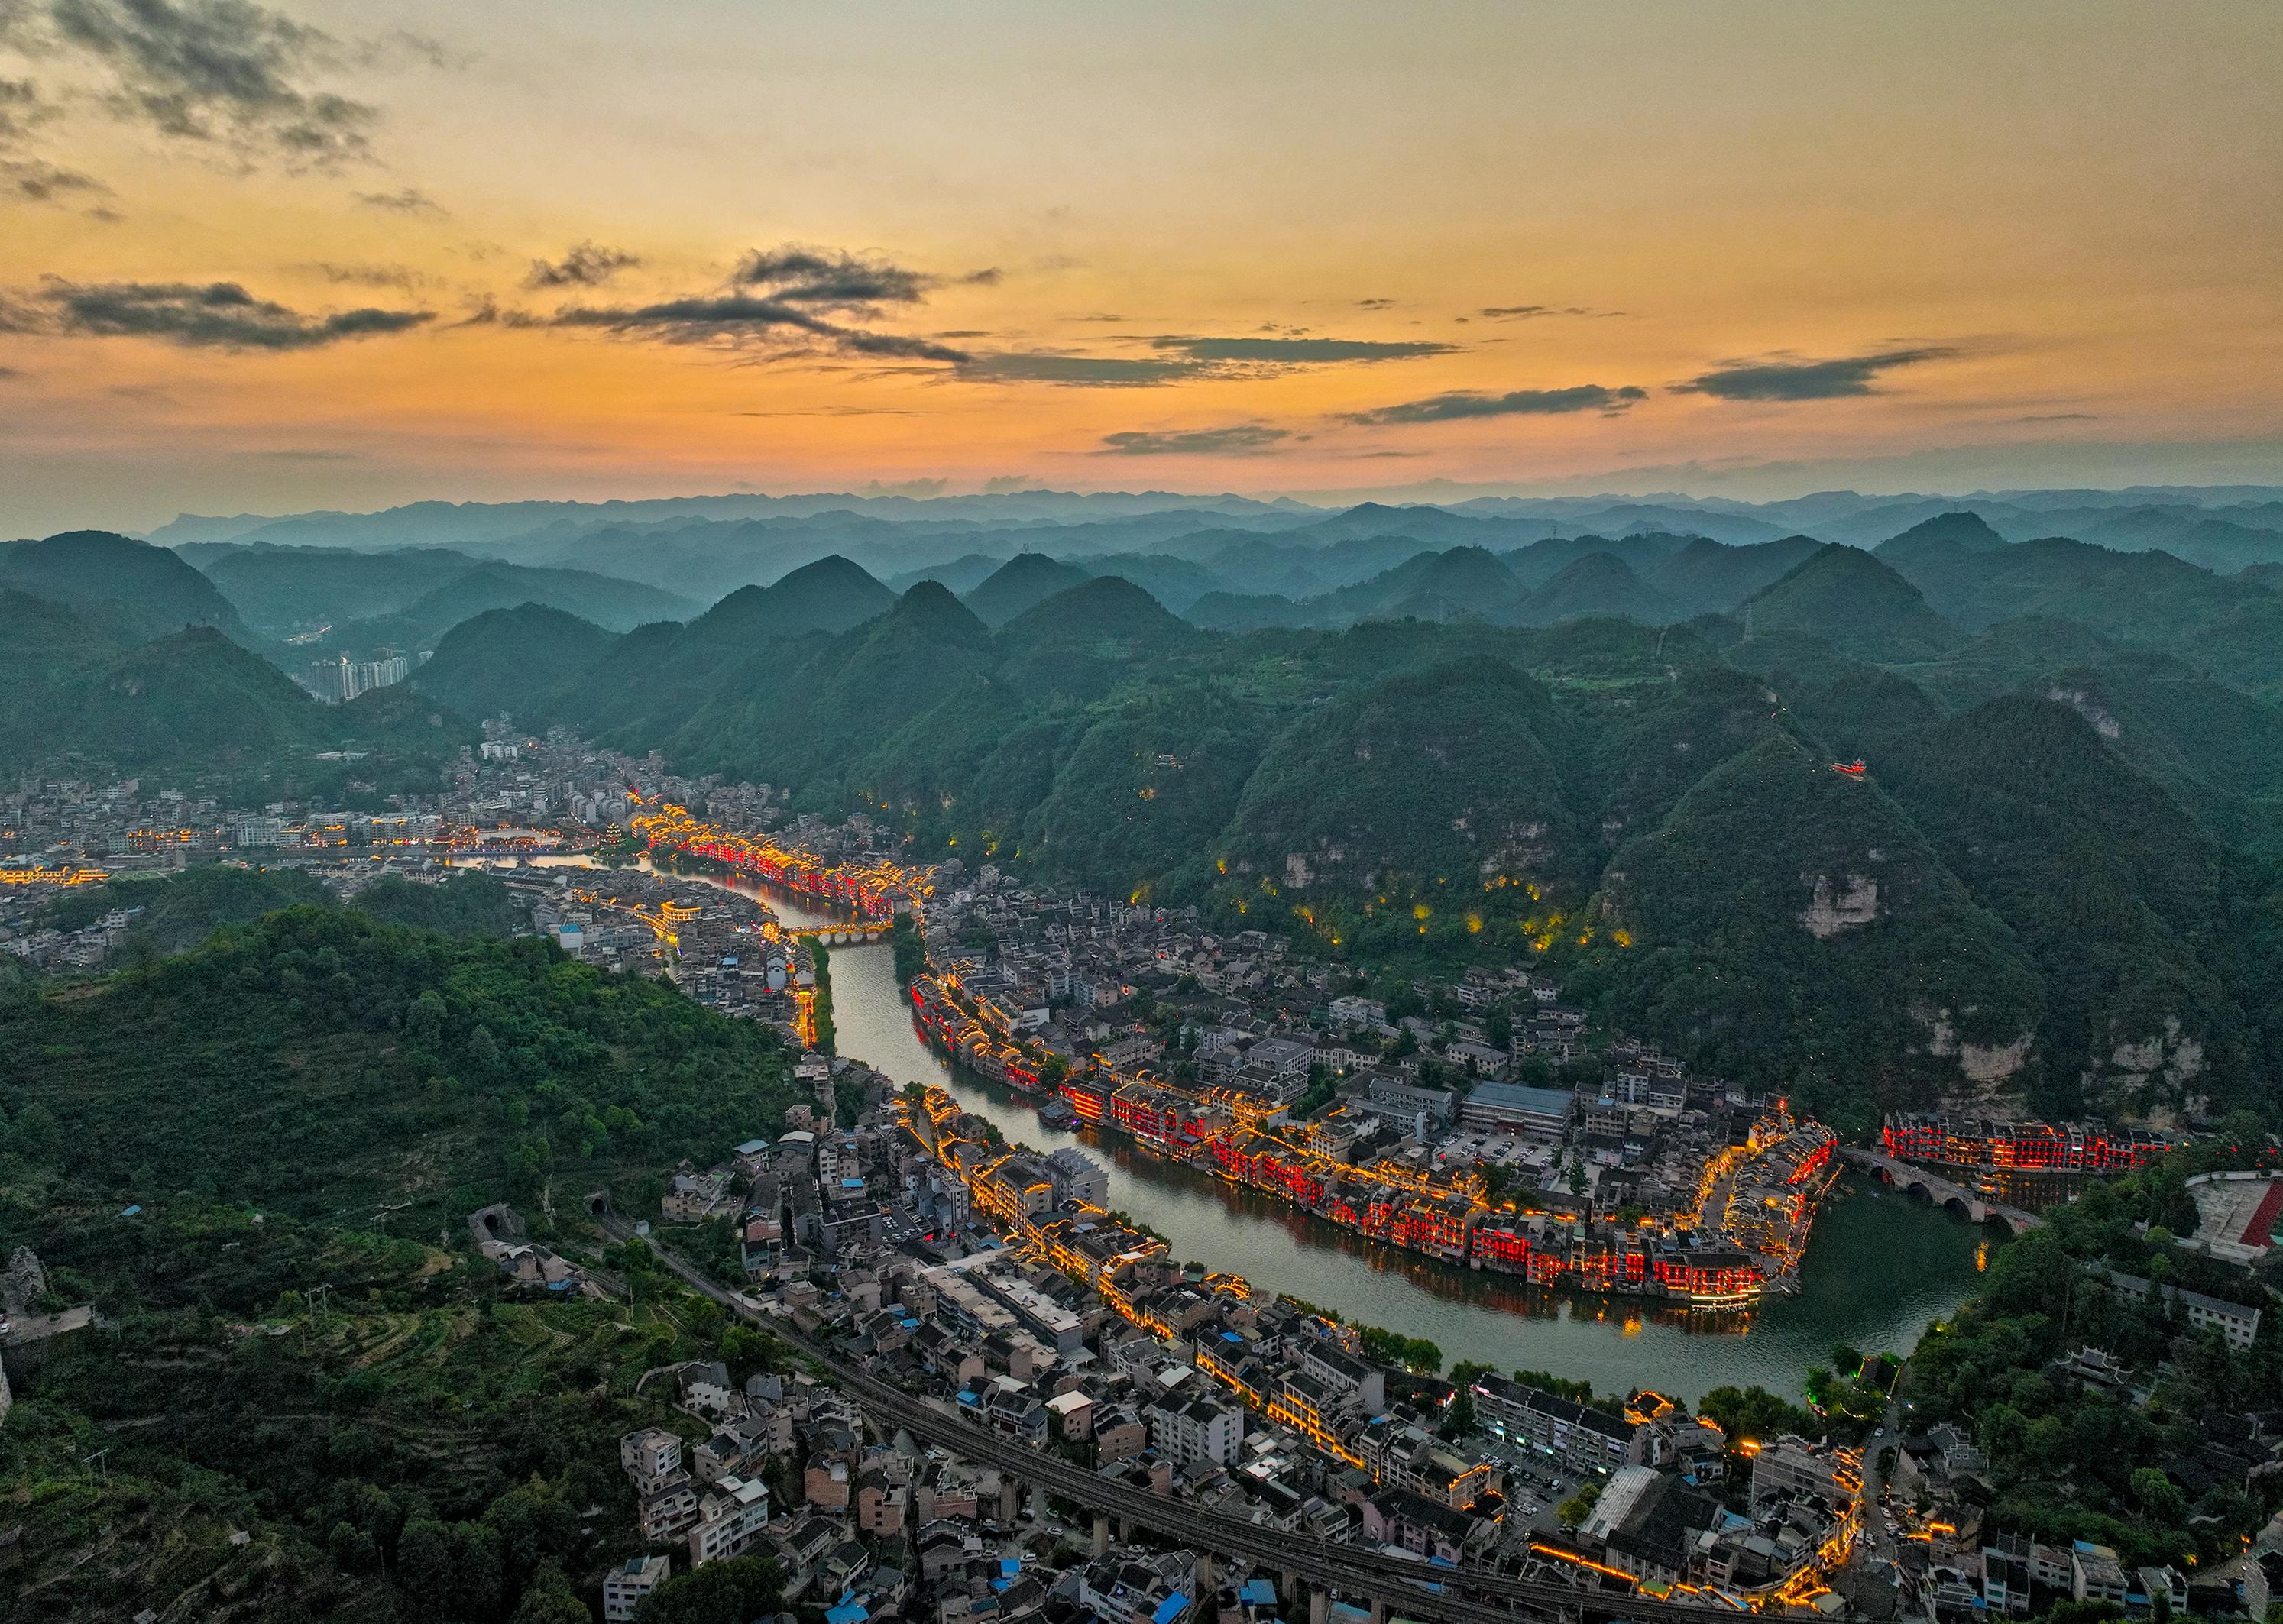 A bird's-eye view captures the beauty of Zhenyuan ancient town in southwest China's Guizhou Province. /CNSPHOTO